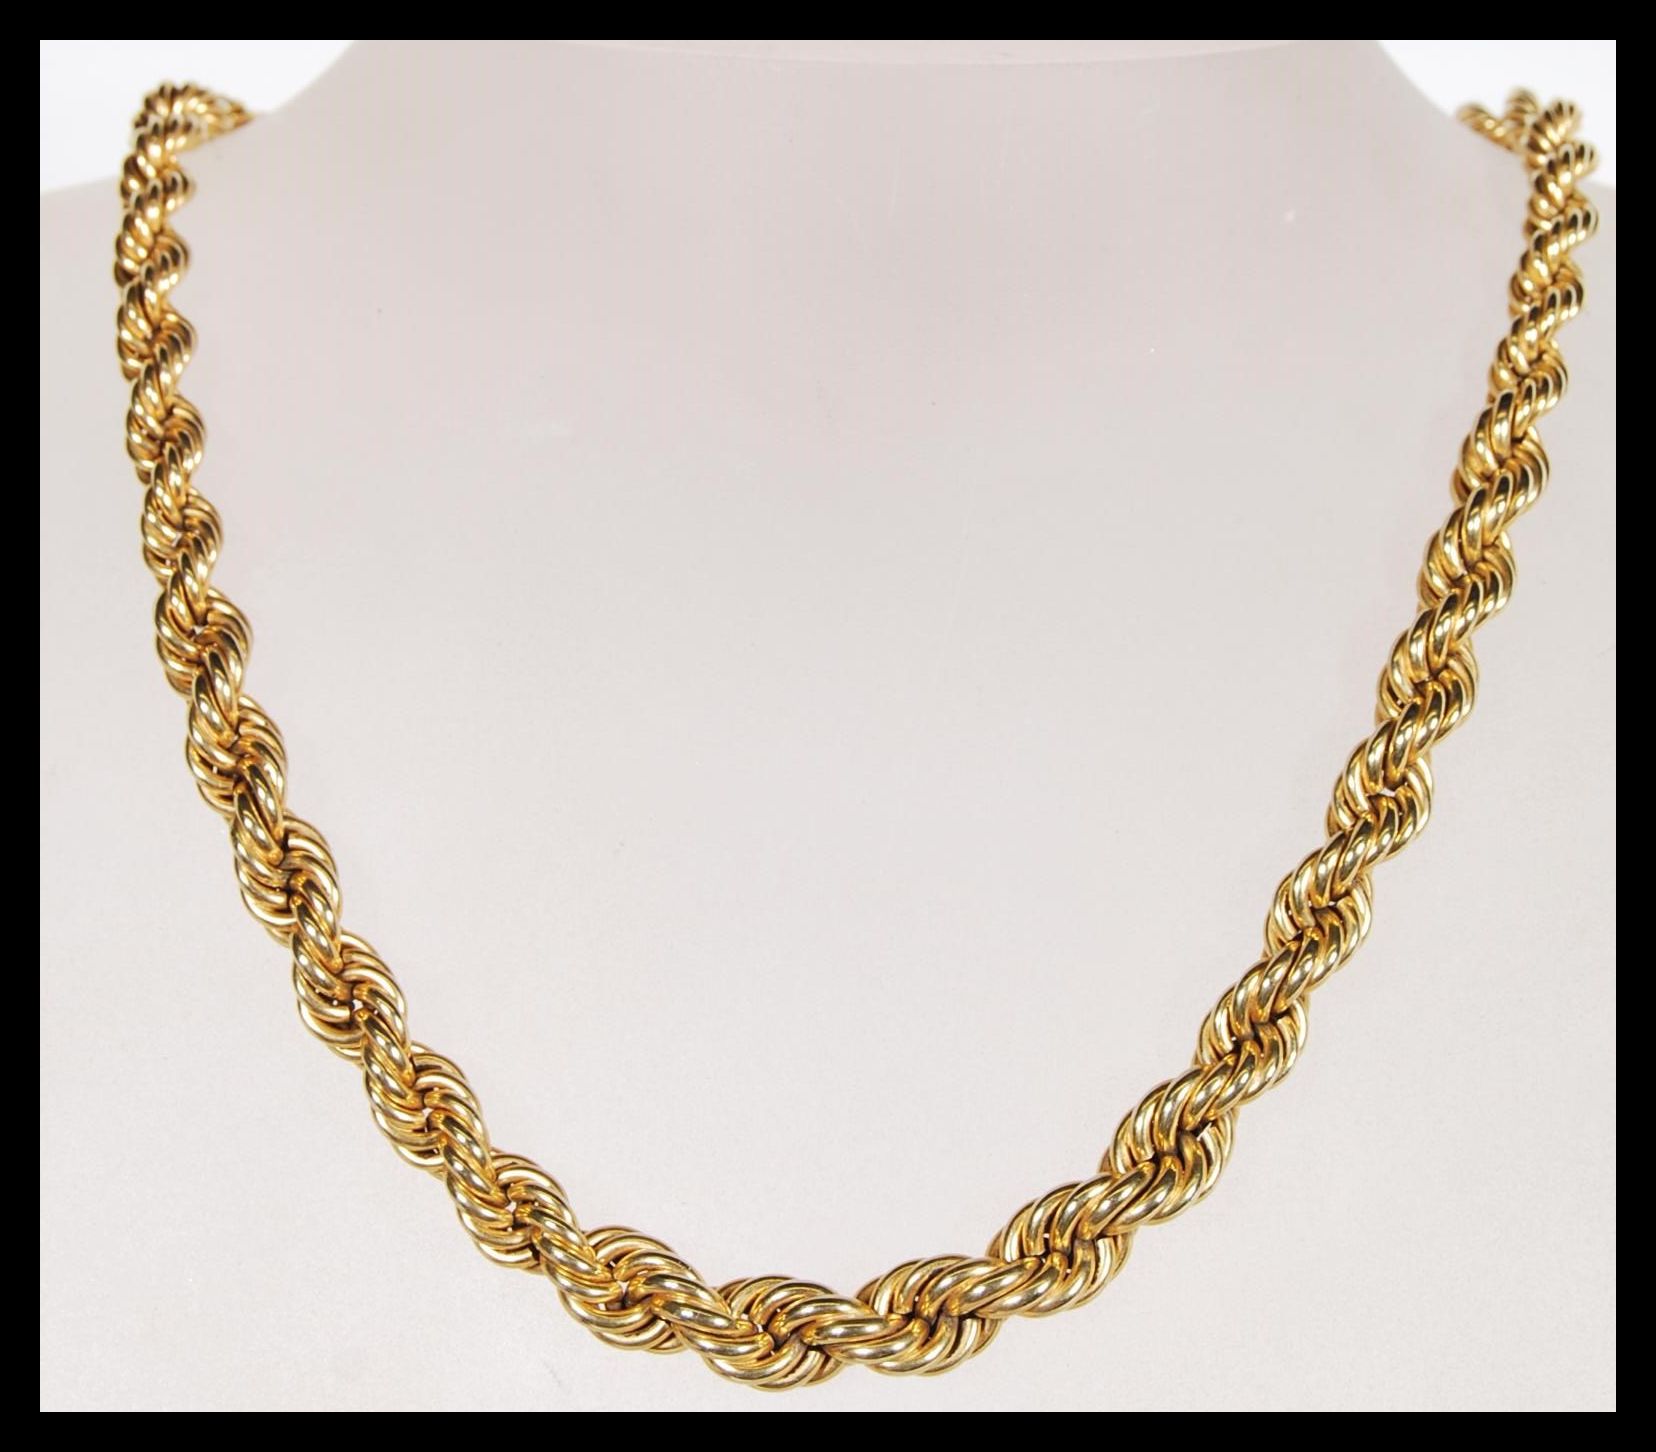 A hallmarked 9ct gold rope twist necklace chain of graduating form having bolt ring clasp. - Image 2 of 3